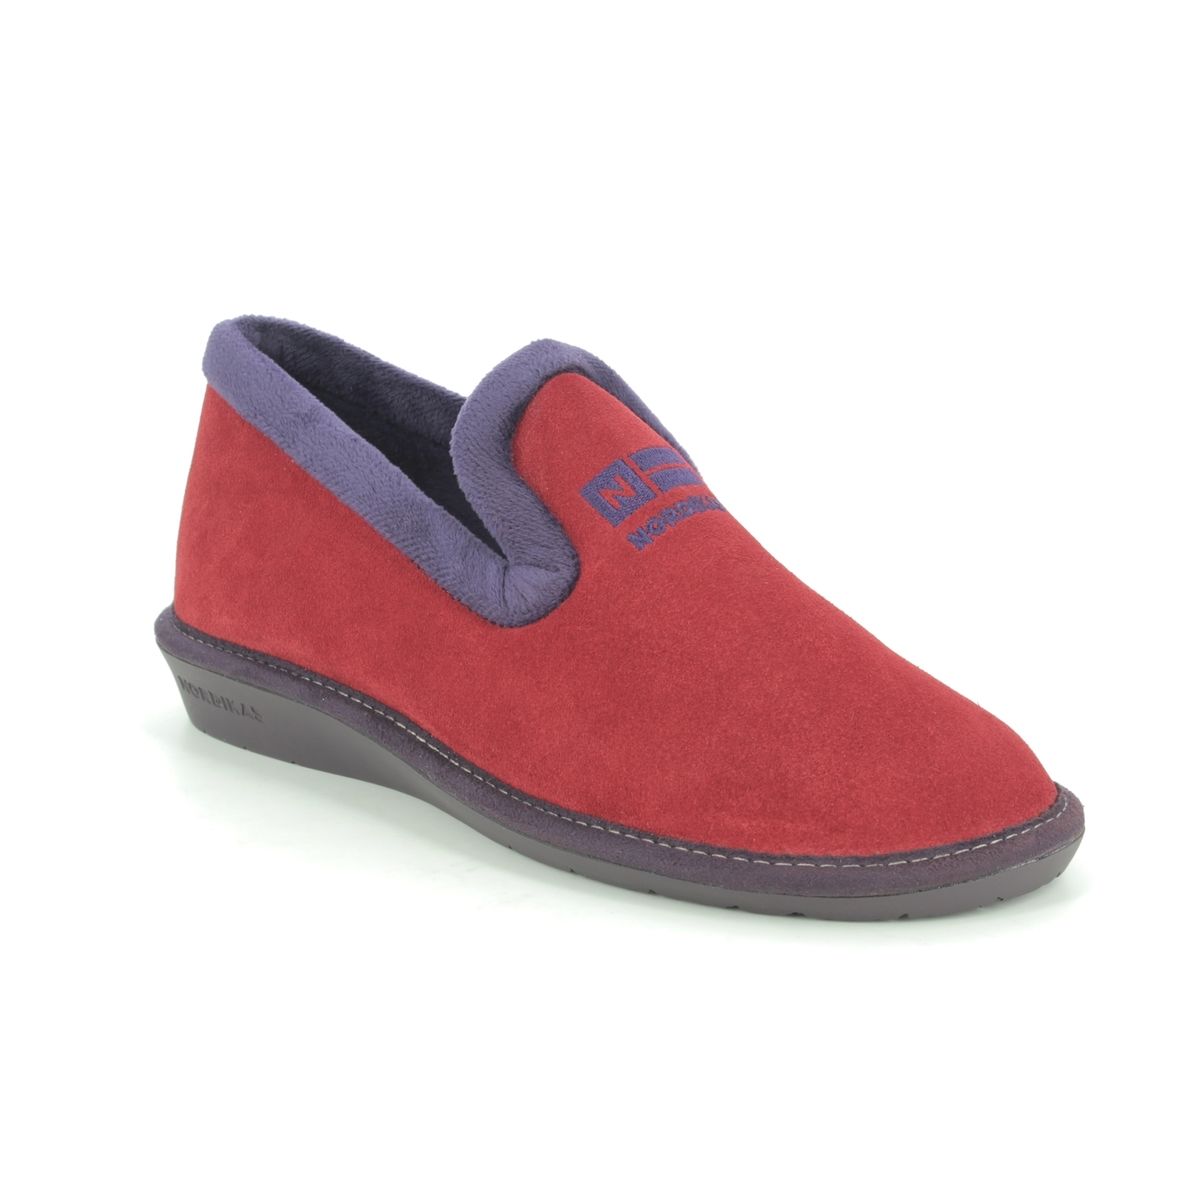 Nordikas Tabackin Red Suede Womens Slippers 305-4   Nicola 3 In Size 38 In Plain Red Suede